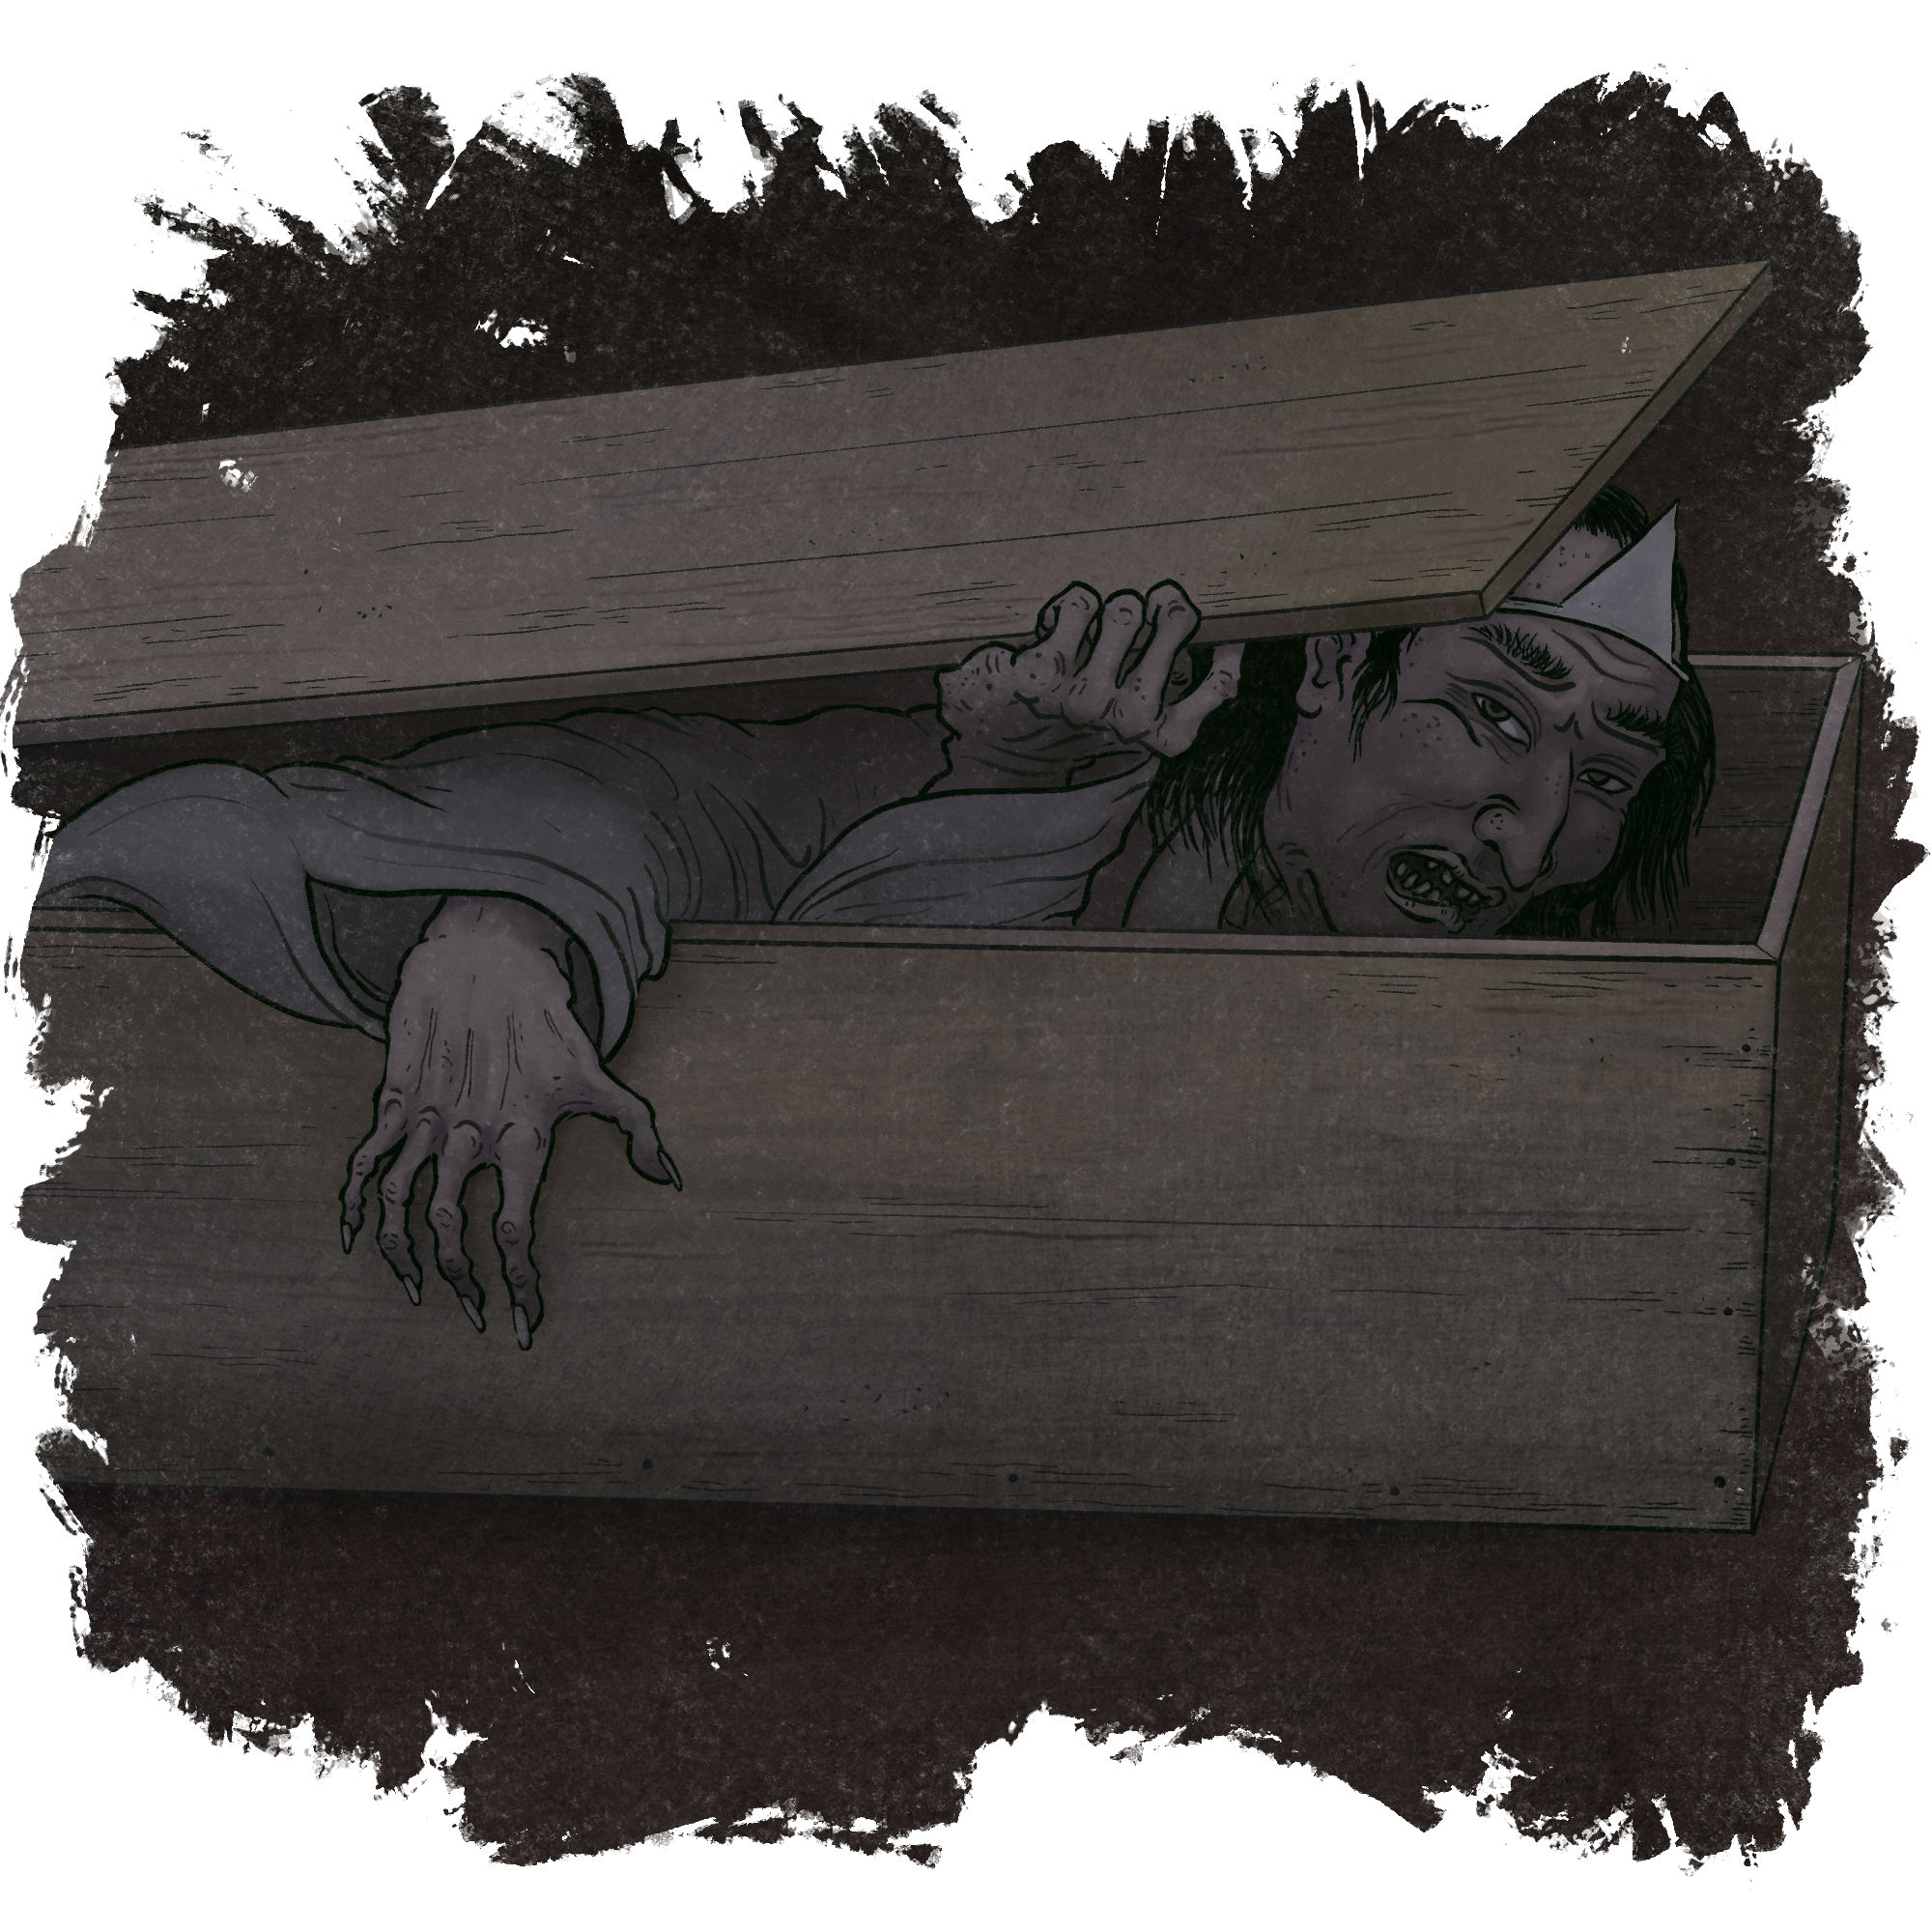 A corpse in a white burial kimono crawls out of its own coffin.